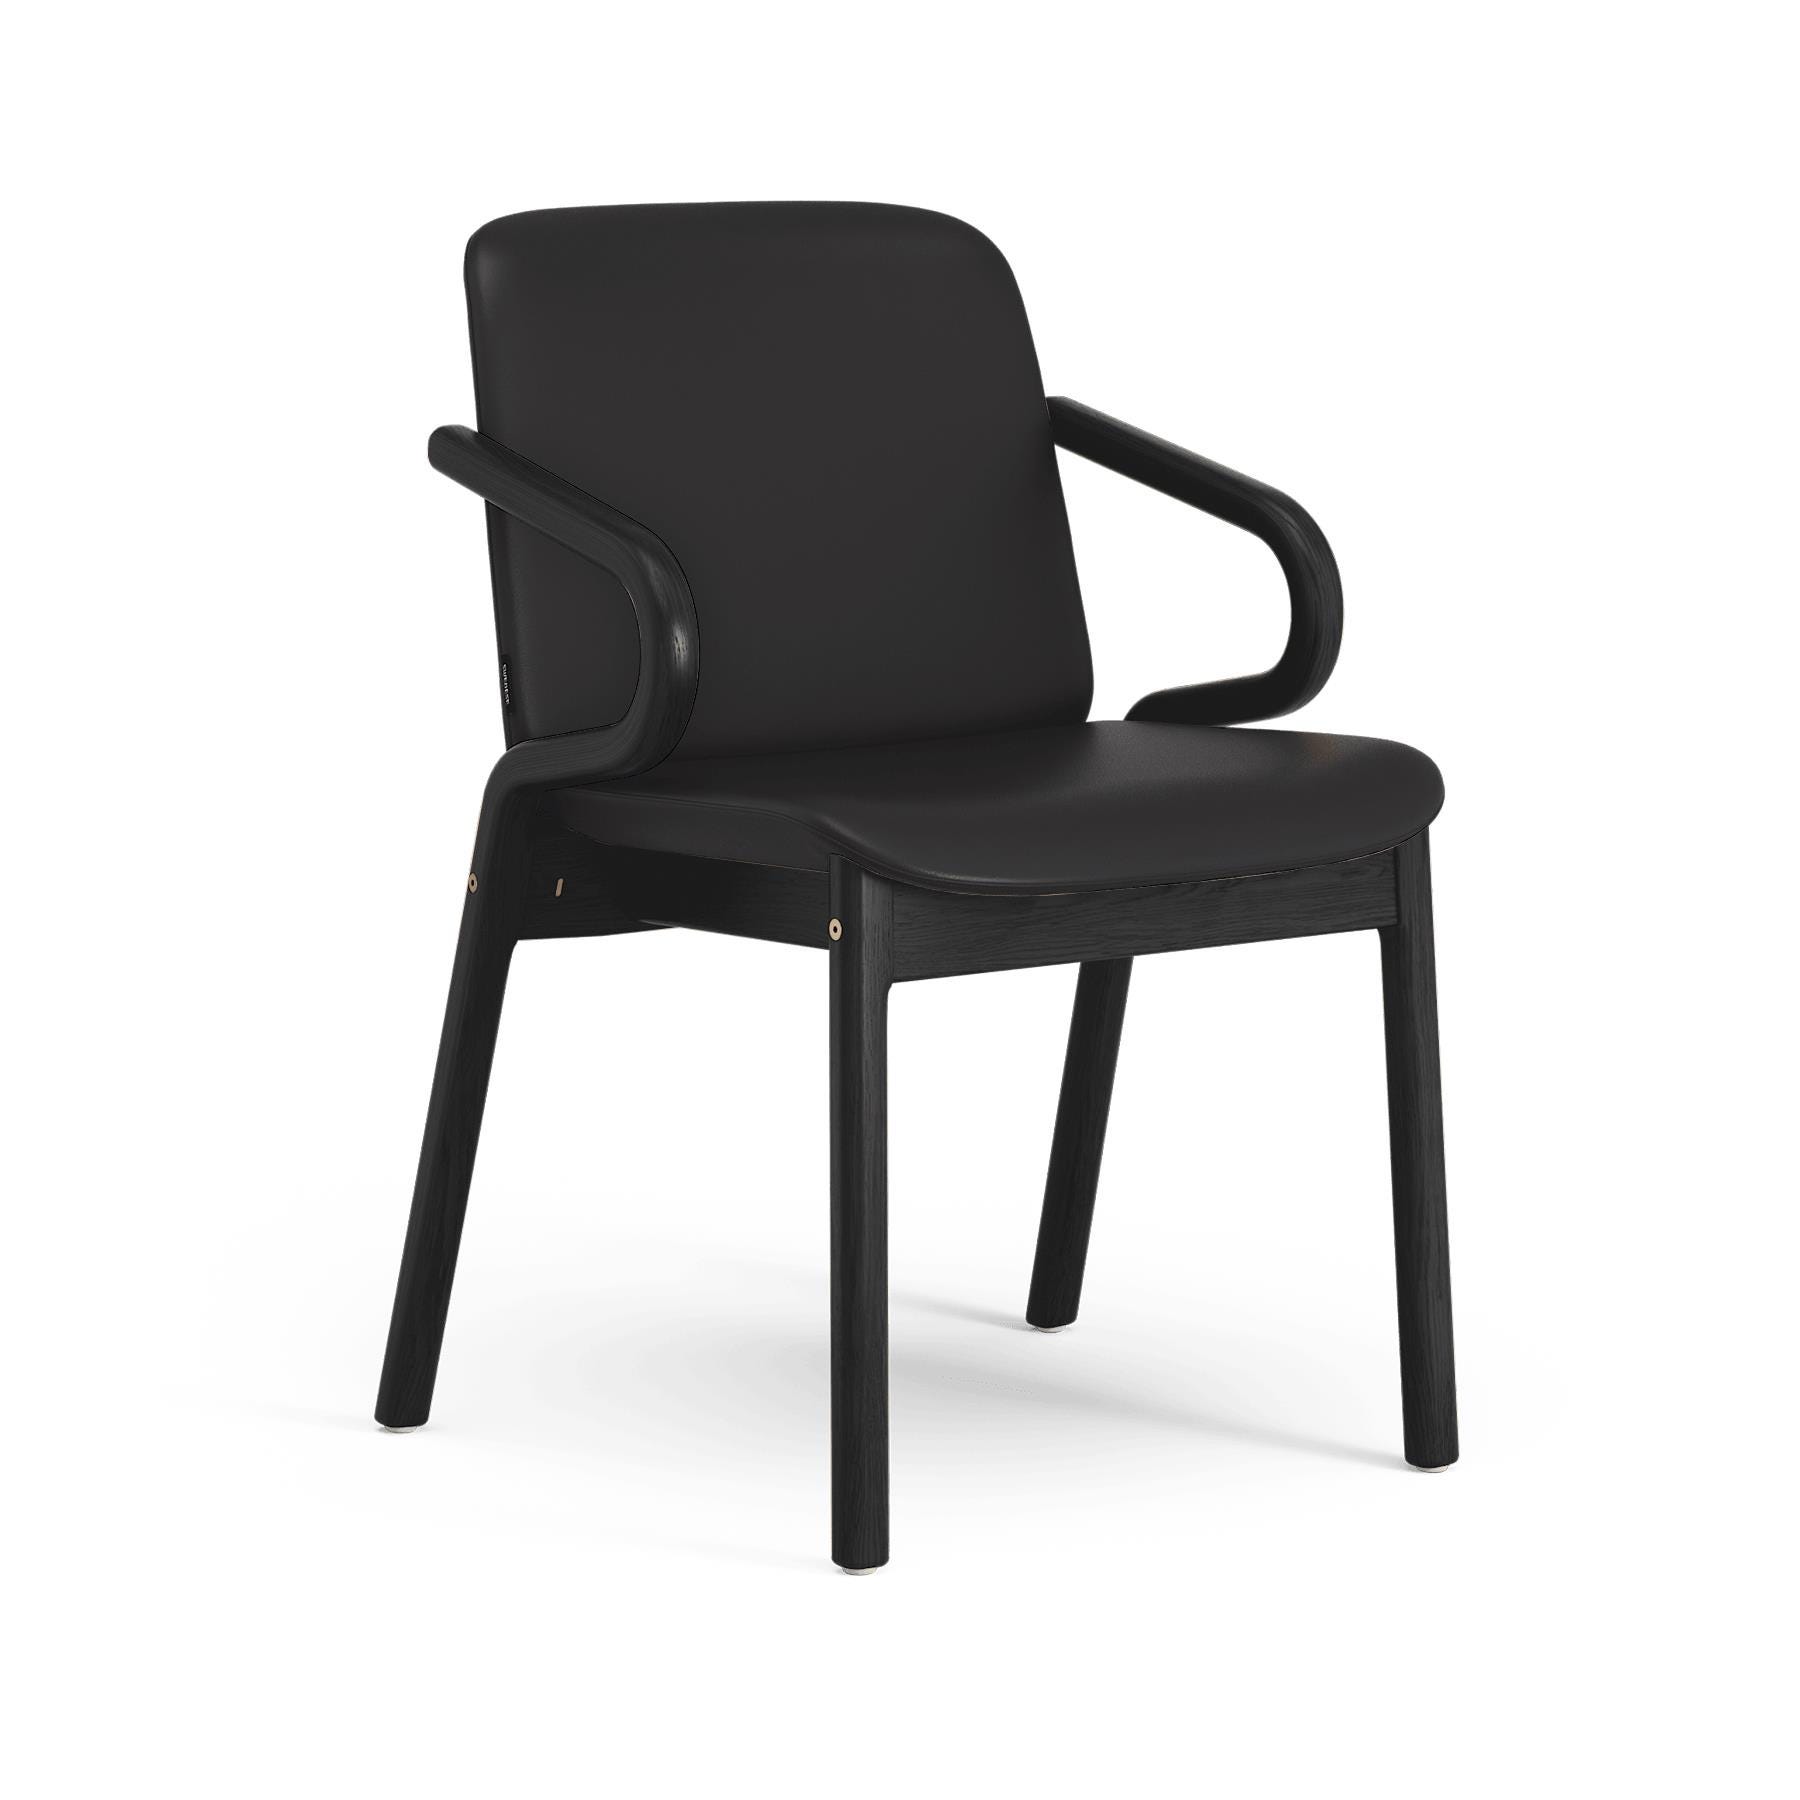 Swedese Amstelle Armchair Black Ash Soft Black Leather Designer Furniture From Holloways Of Ludlow